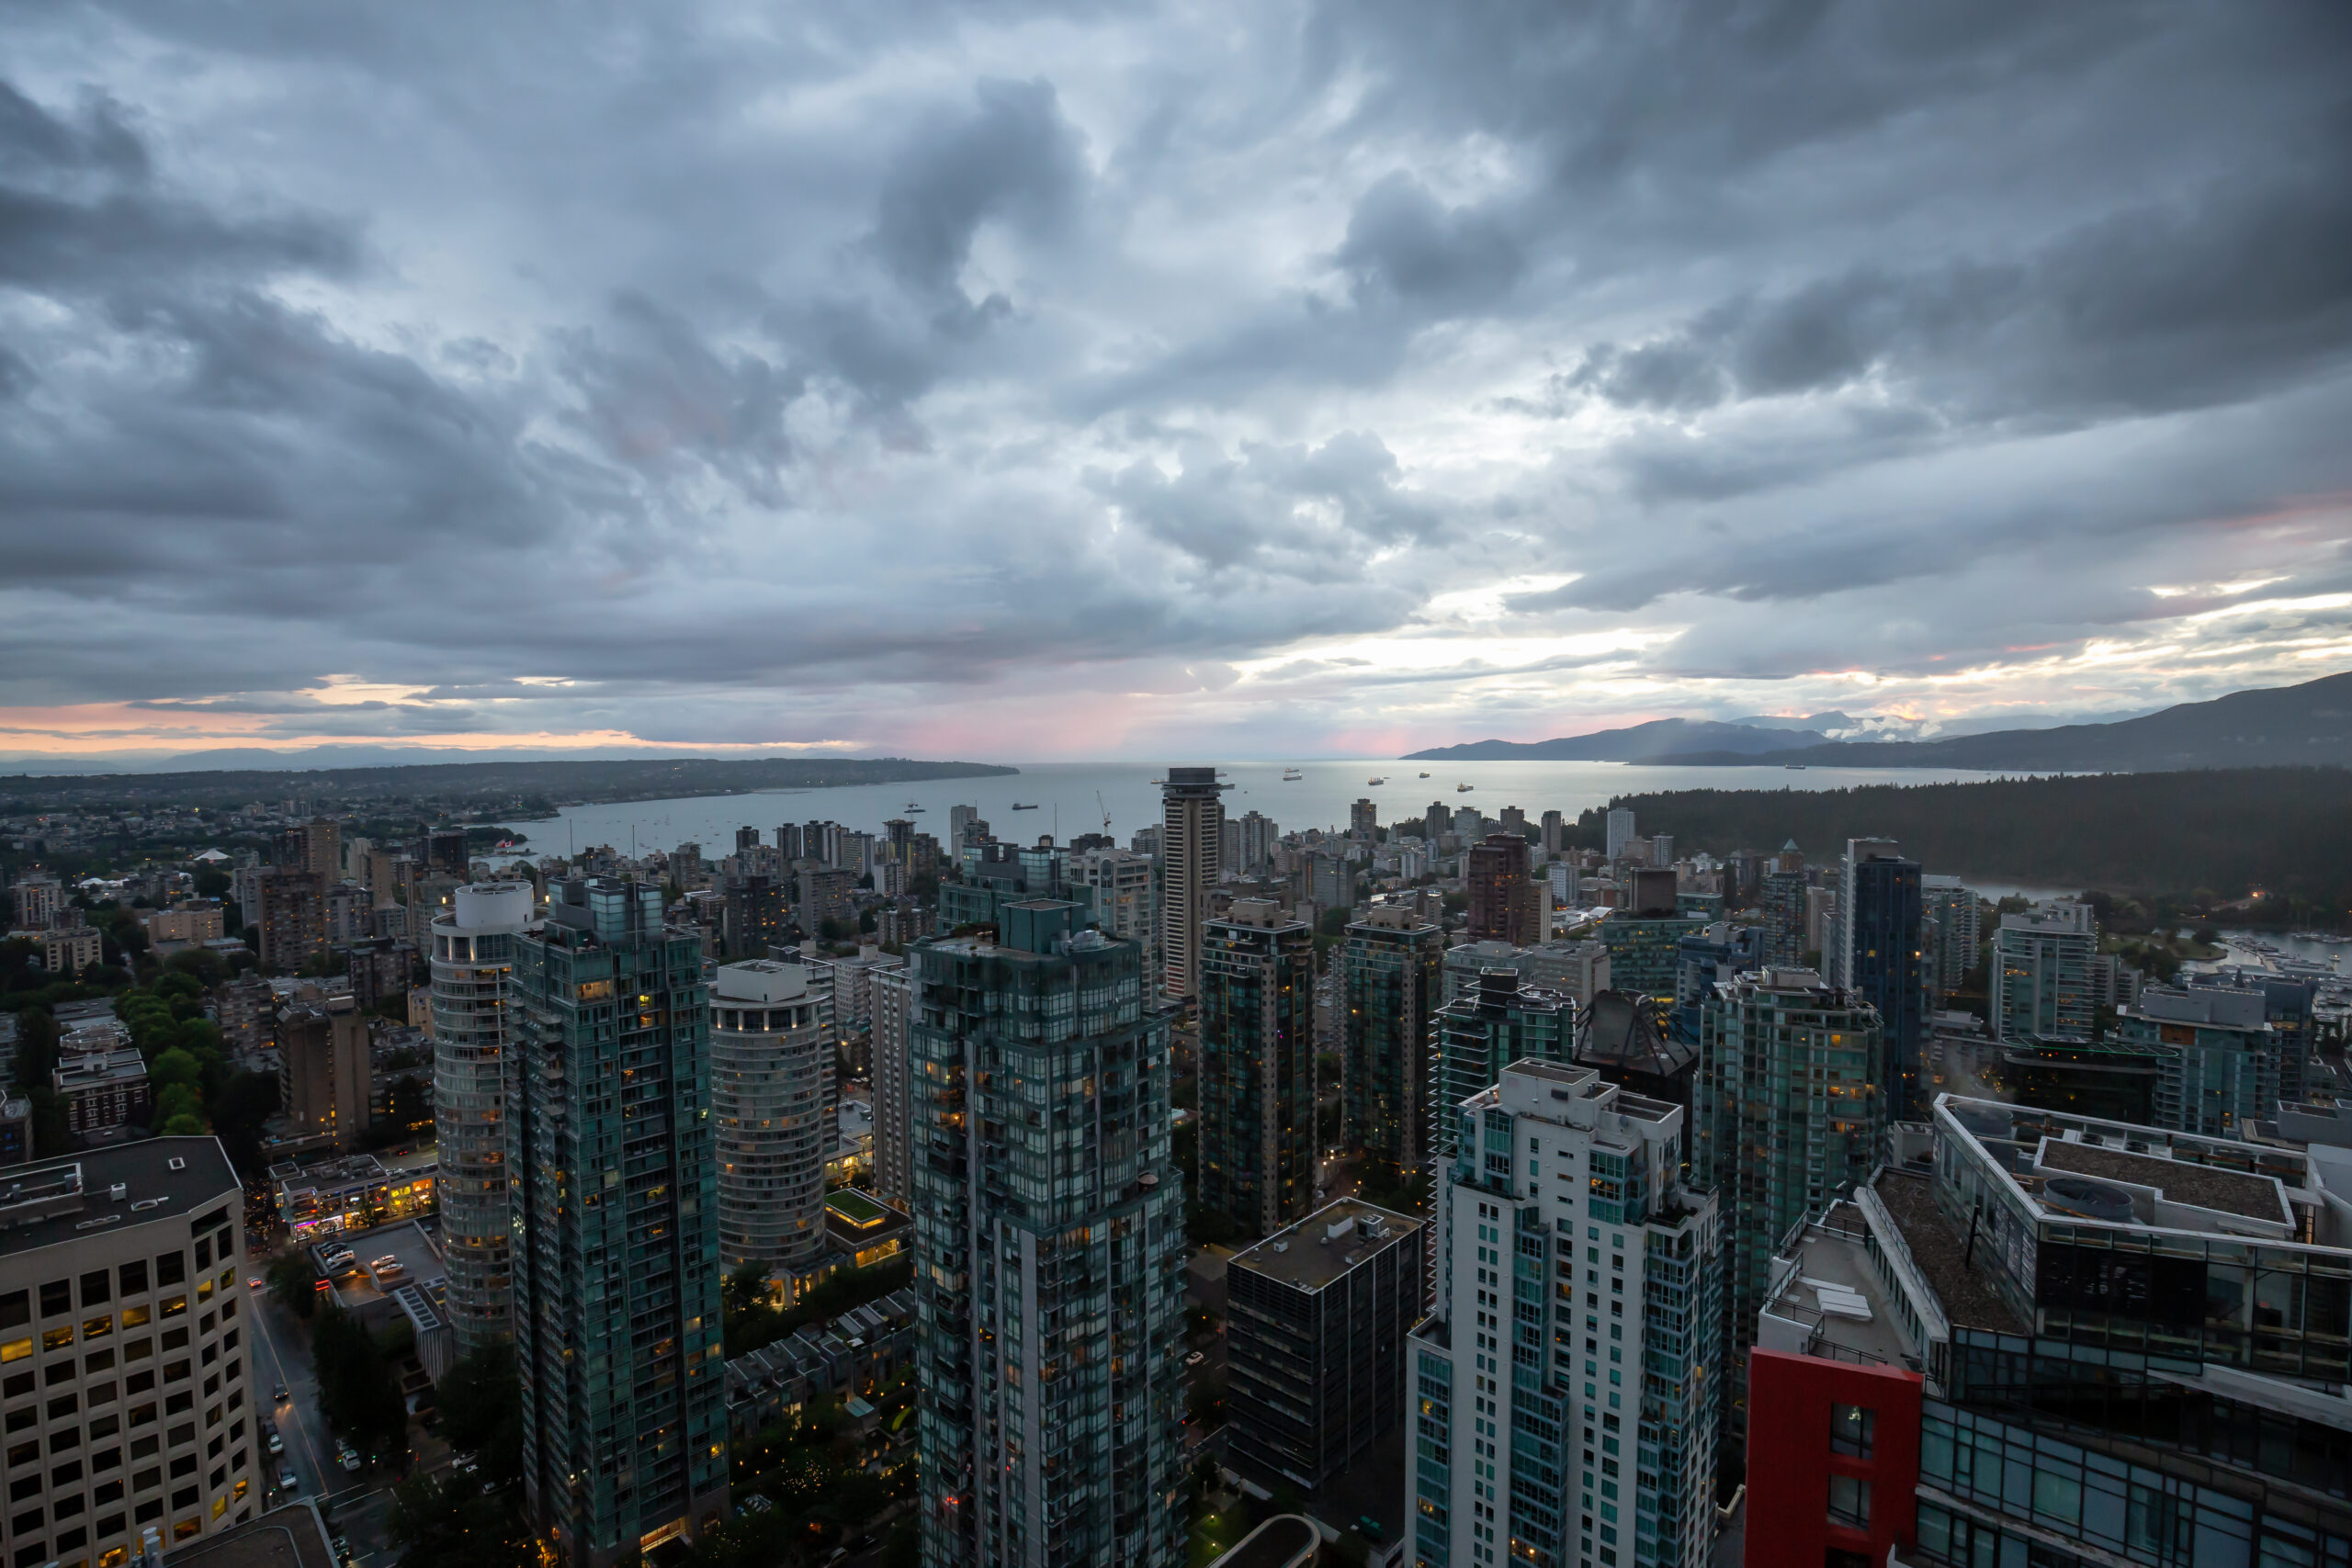 Vancouver city scape under stormy skies